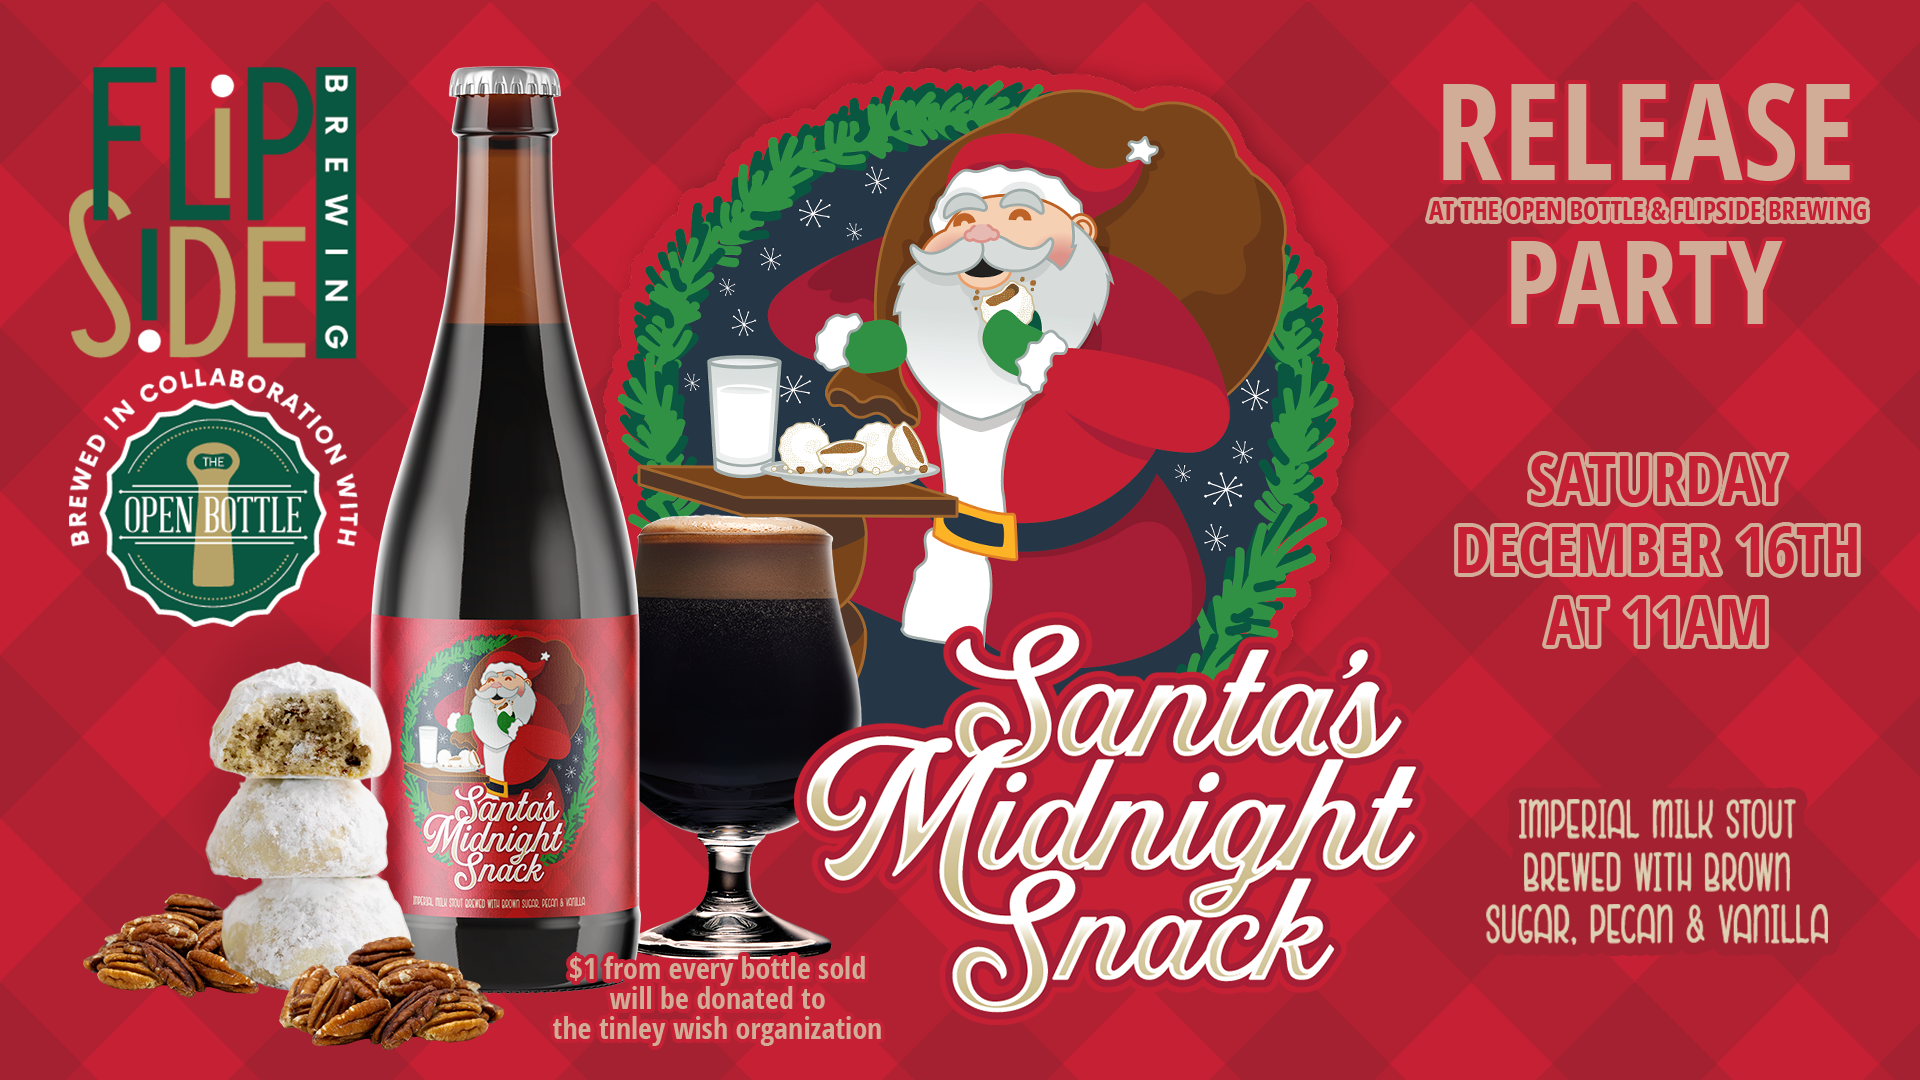 Event: Flipside & The Open Bottle ‘Santa’s Midnight’ Snack Release Party